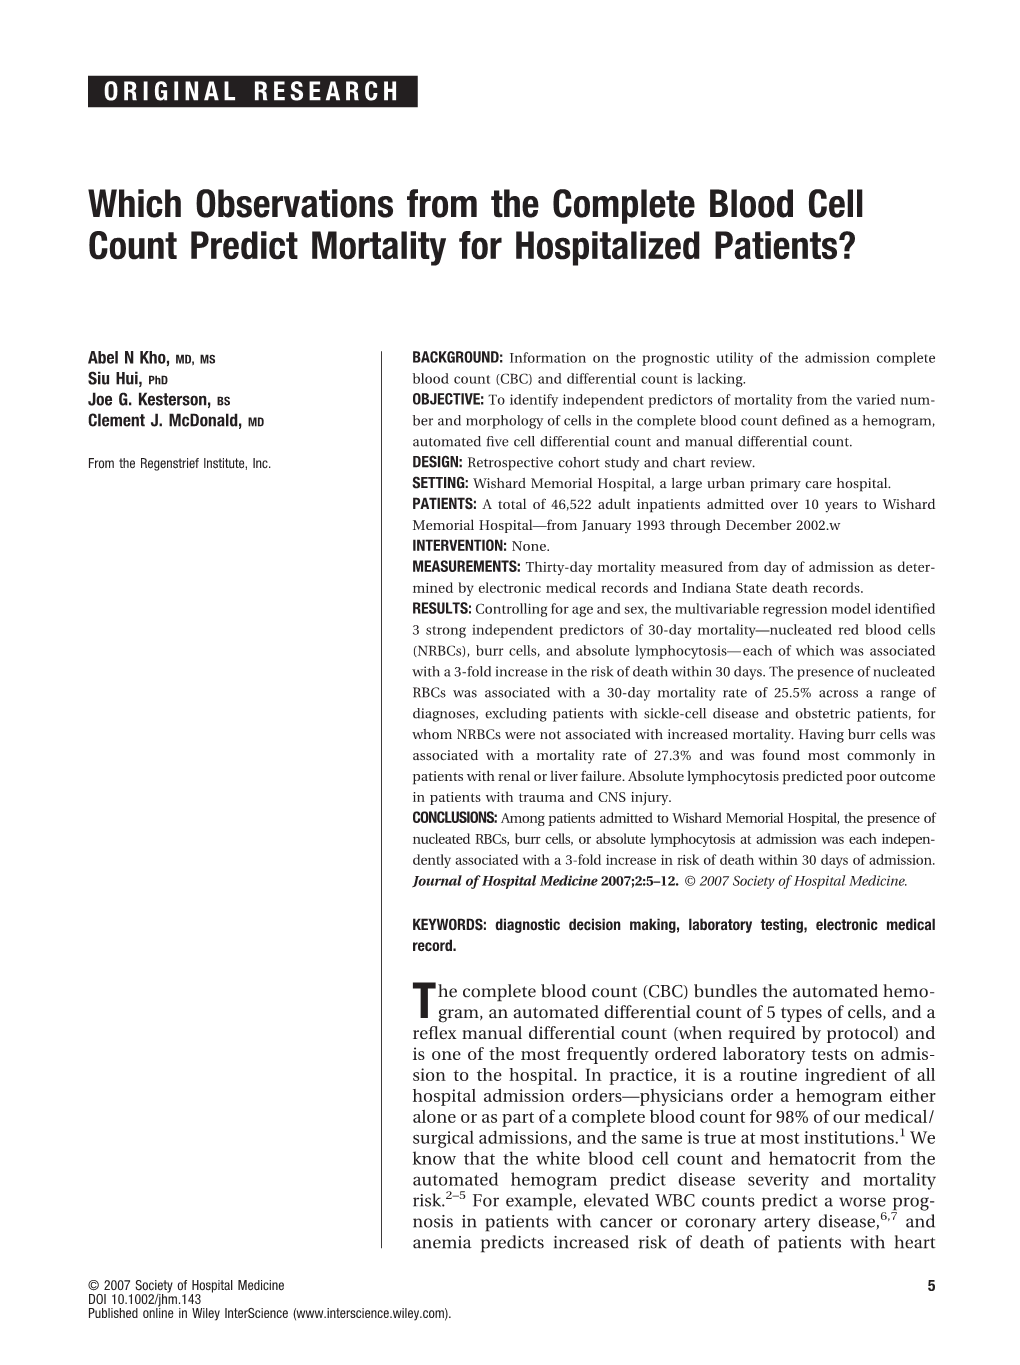 Which Observations from the Complete Blood Cell Count Predict Mortality for Hospitalized Patients?